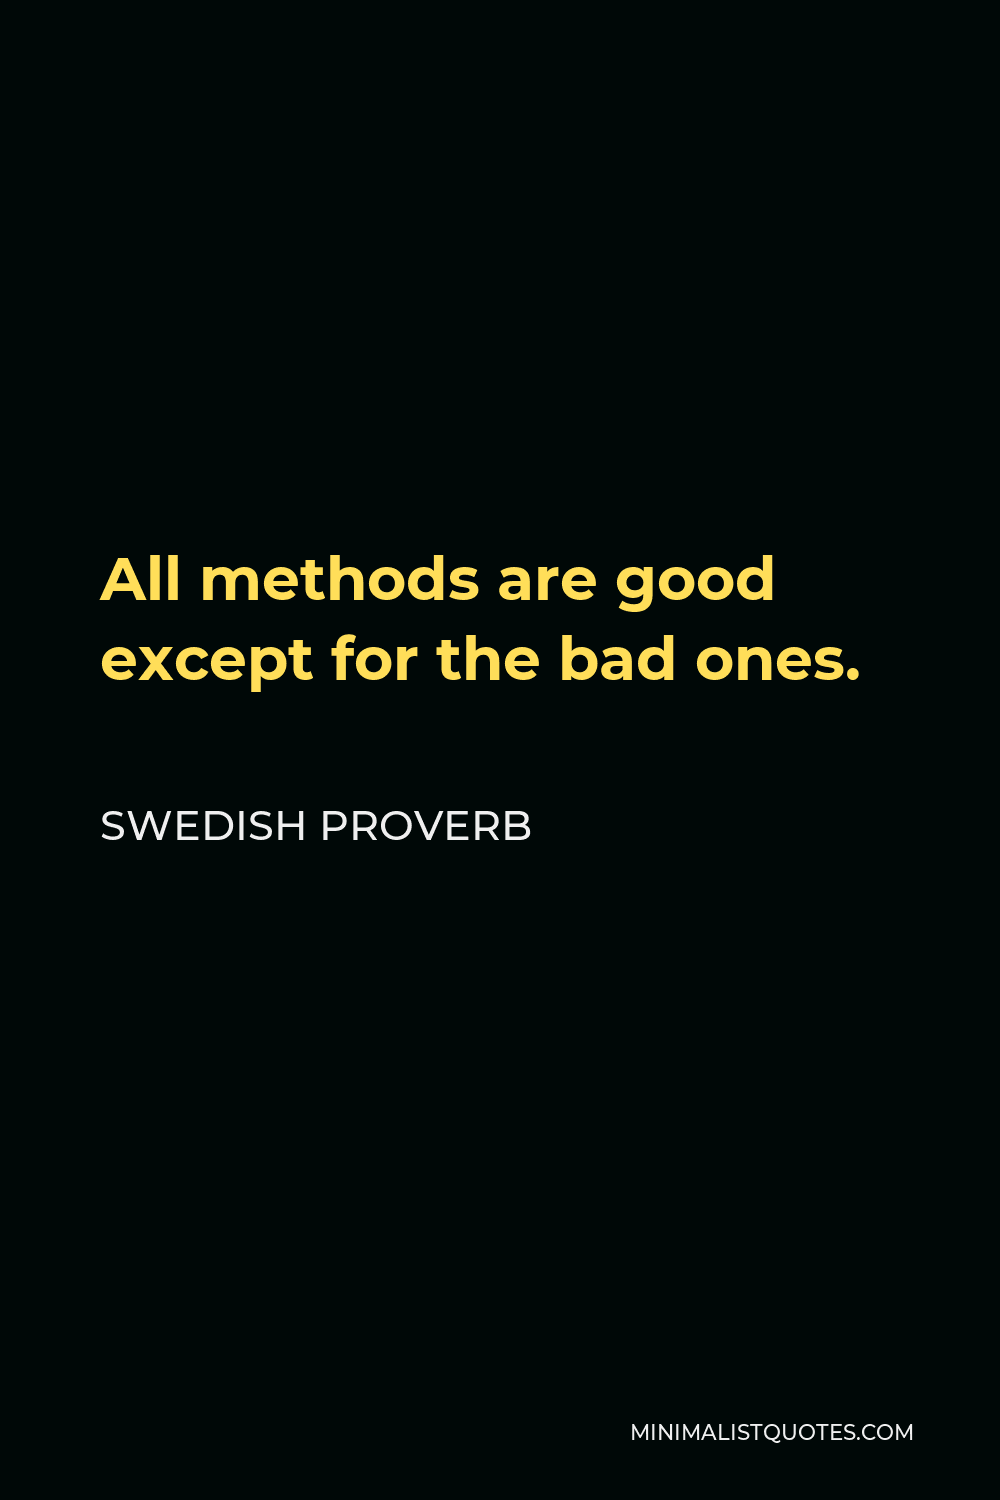 Swedish Proverb Quote - All methods are good except for the bad ones.